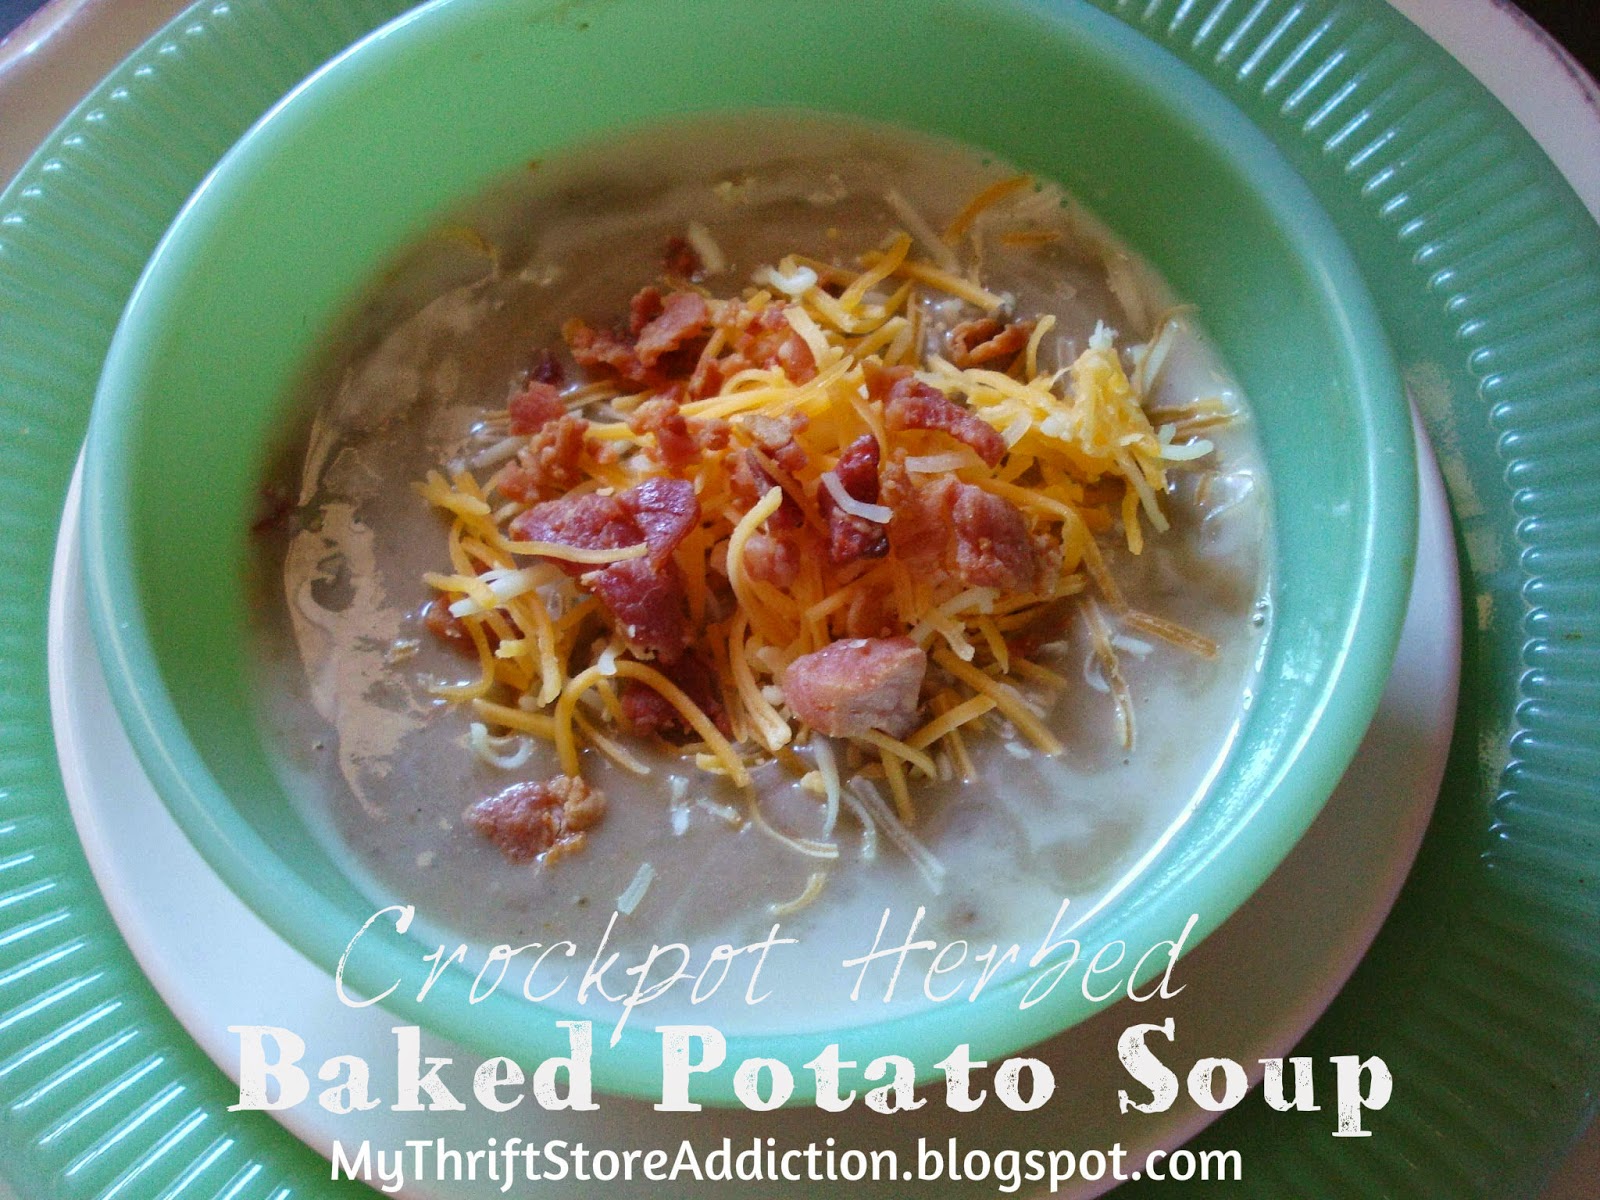 Herbed baked potato soup